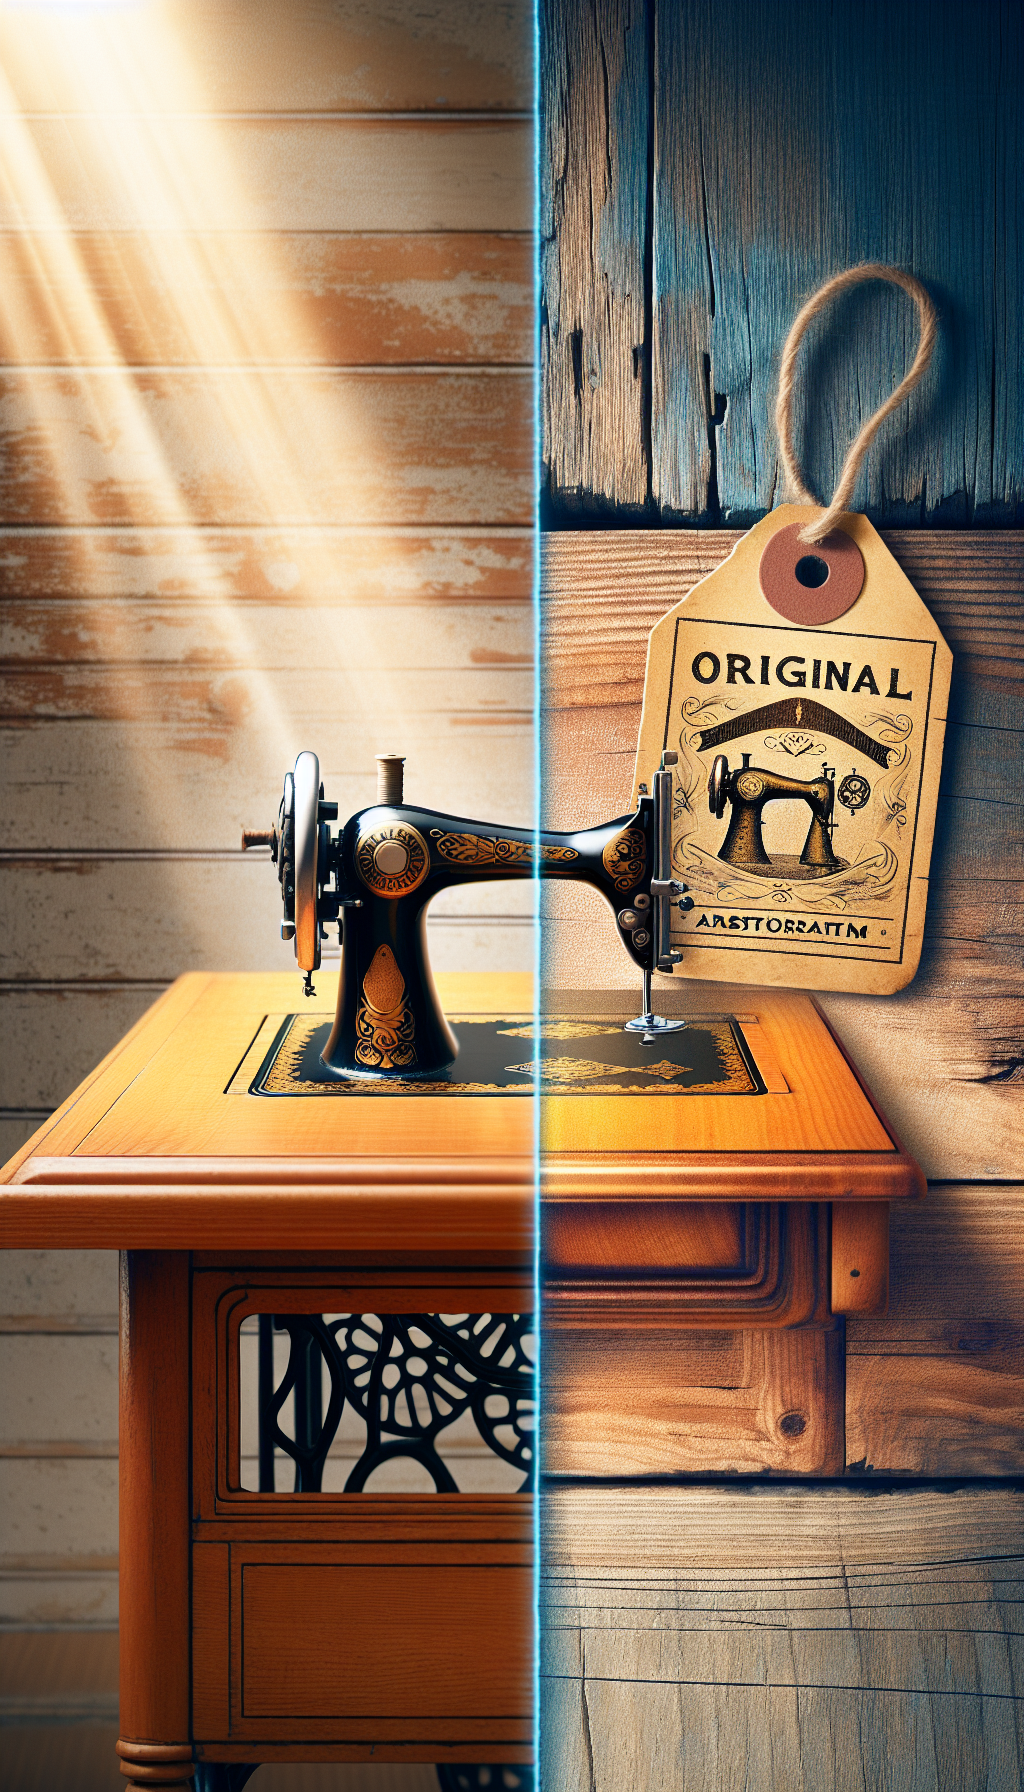 An illustration divided diagonally: on the left, a faded half depicting a vintage Singer sewing machine table with visible wear, representing 'Original Charm.' On the right, the restored version in vibrant colors, showcasing 'Restoration,' with shining wood and a gleaming, functional machine. Both sides feature a translucent tag with the text "Antique Value" connecting the duality of the piece in a harmonious balance.